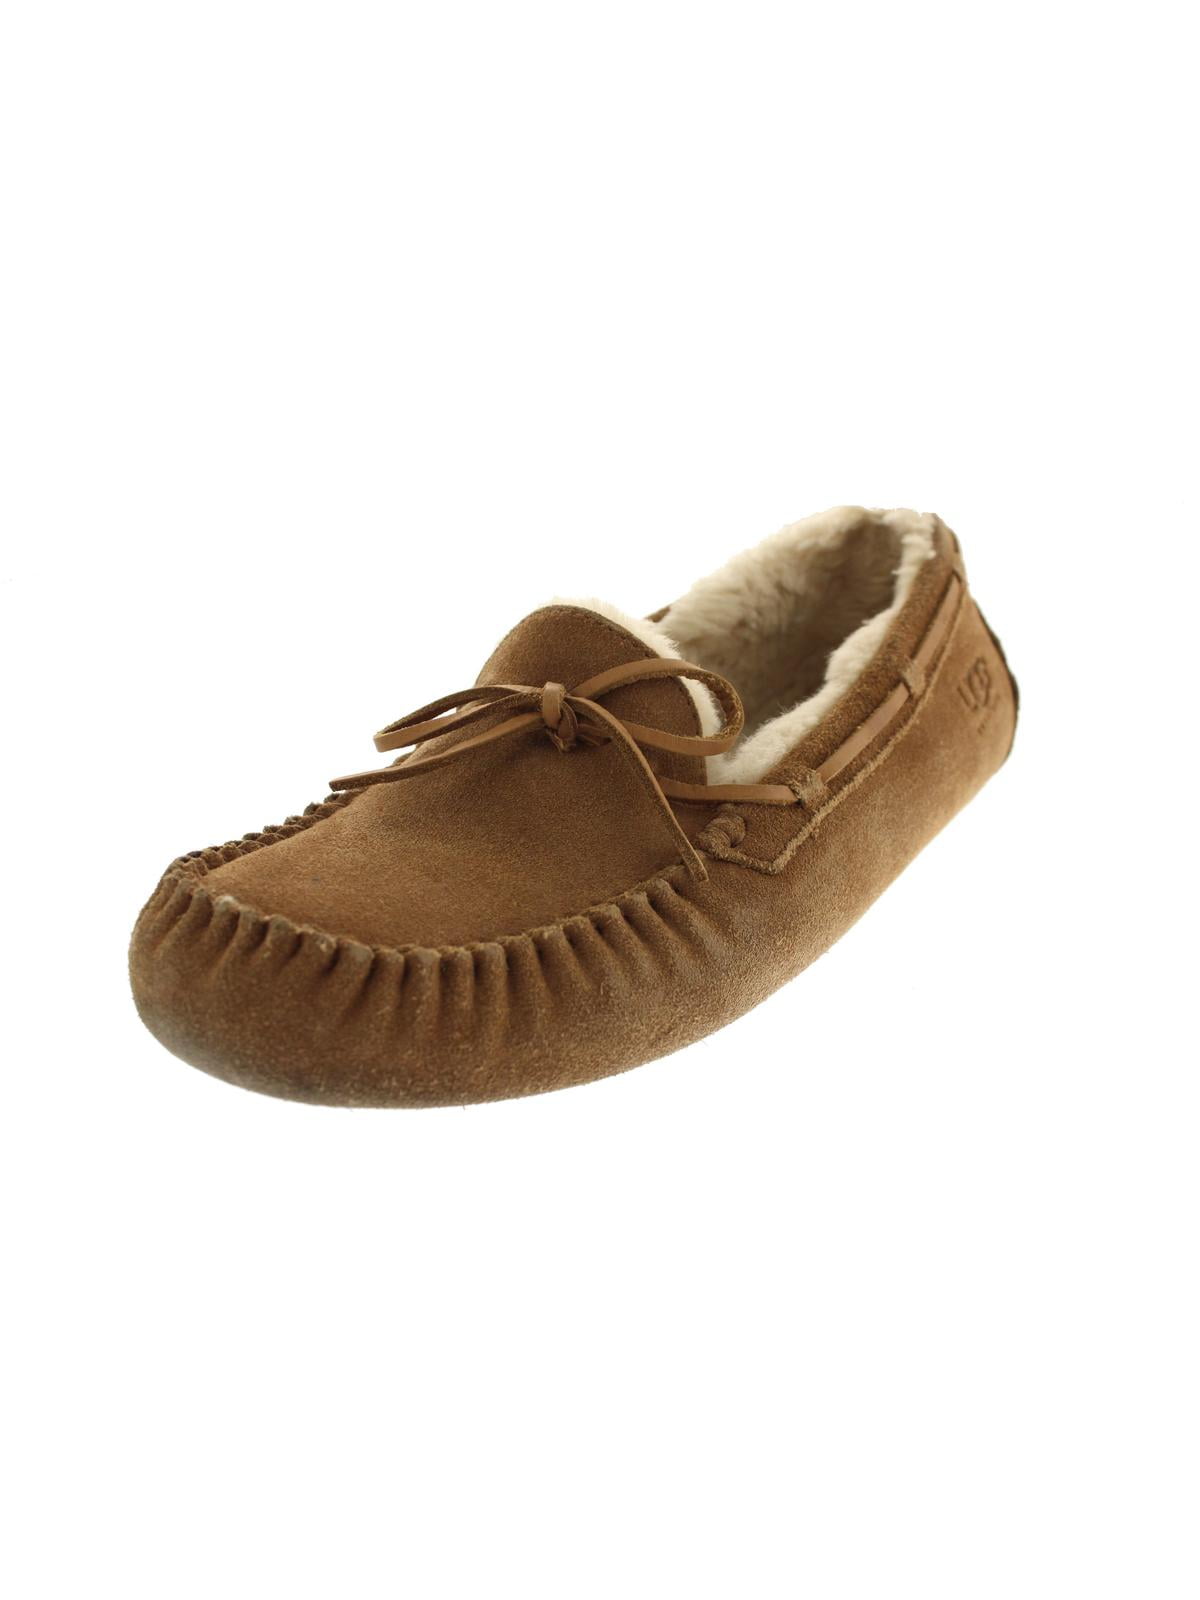 Mens Response ultra light weight  slip on  Moccasin  Slippers size 